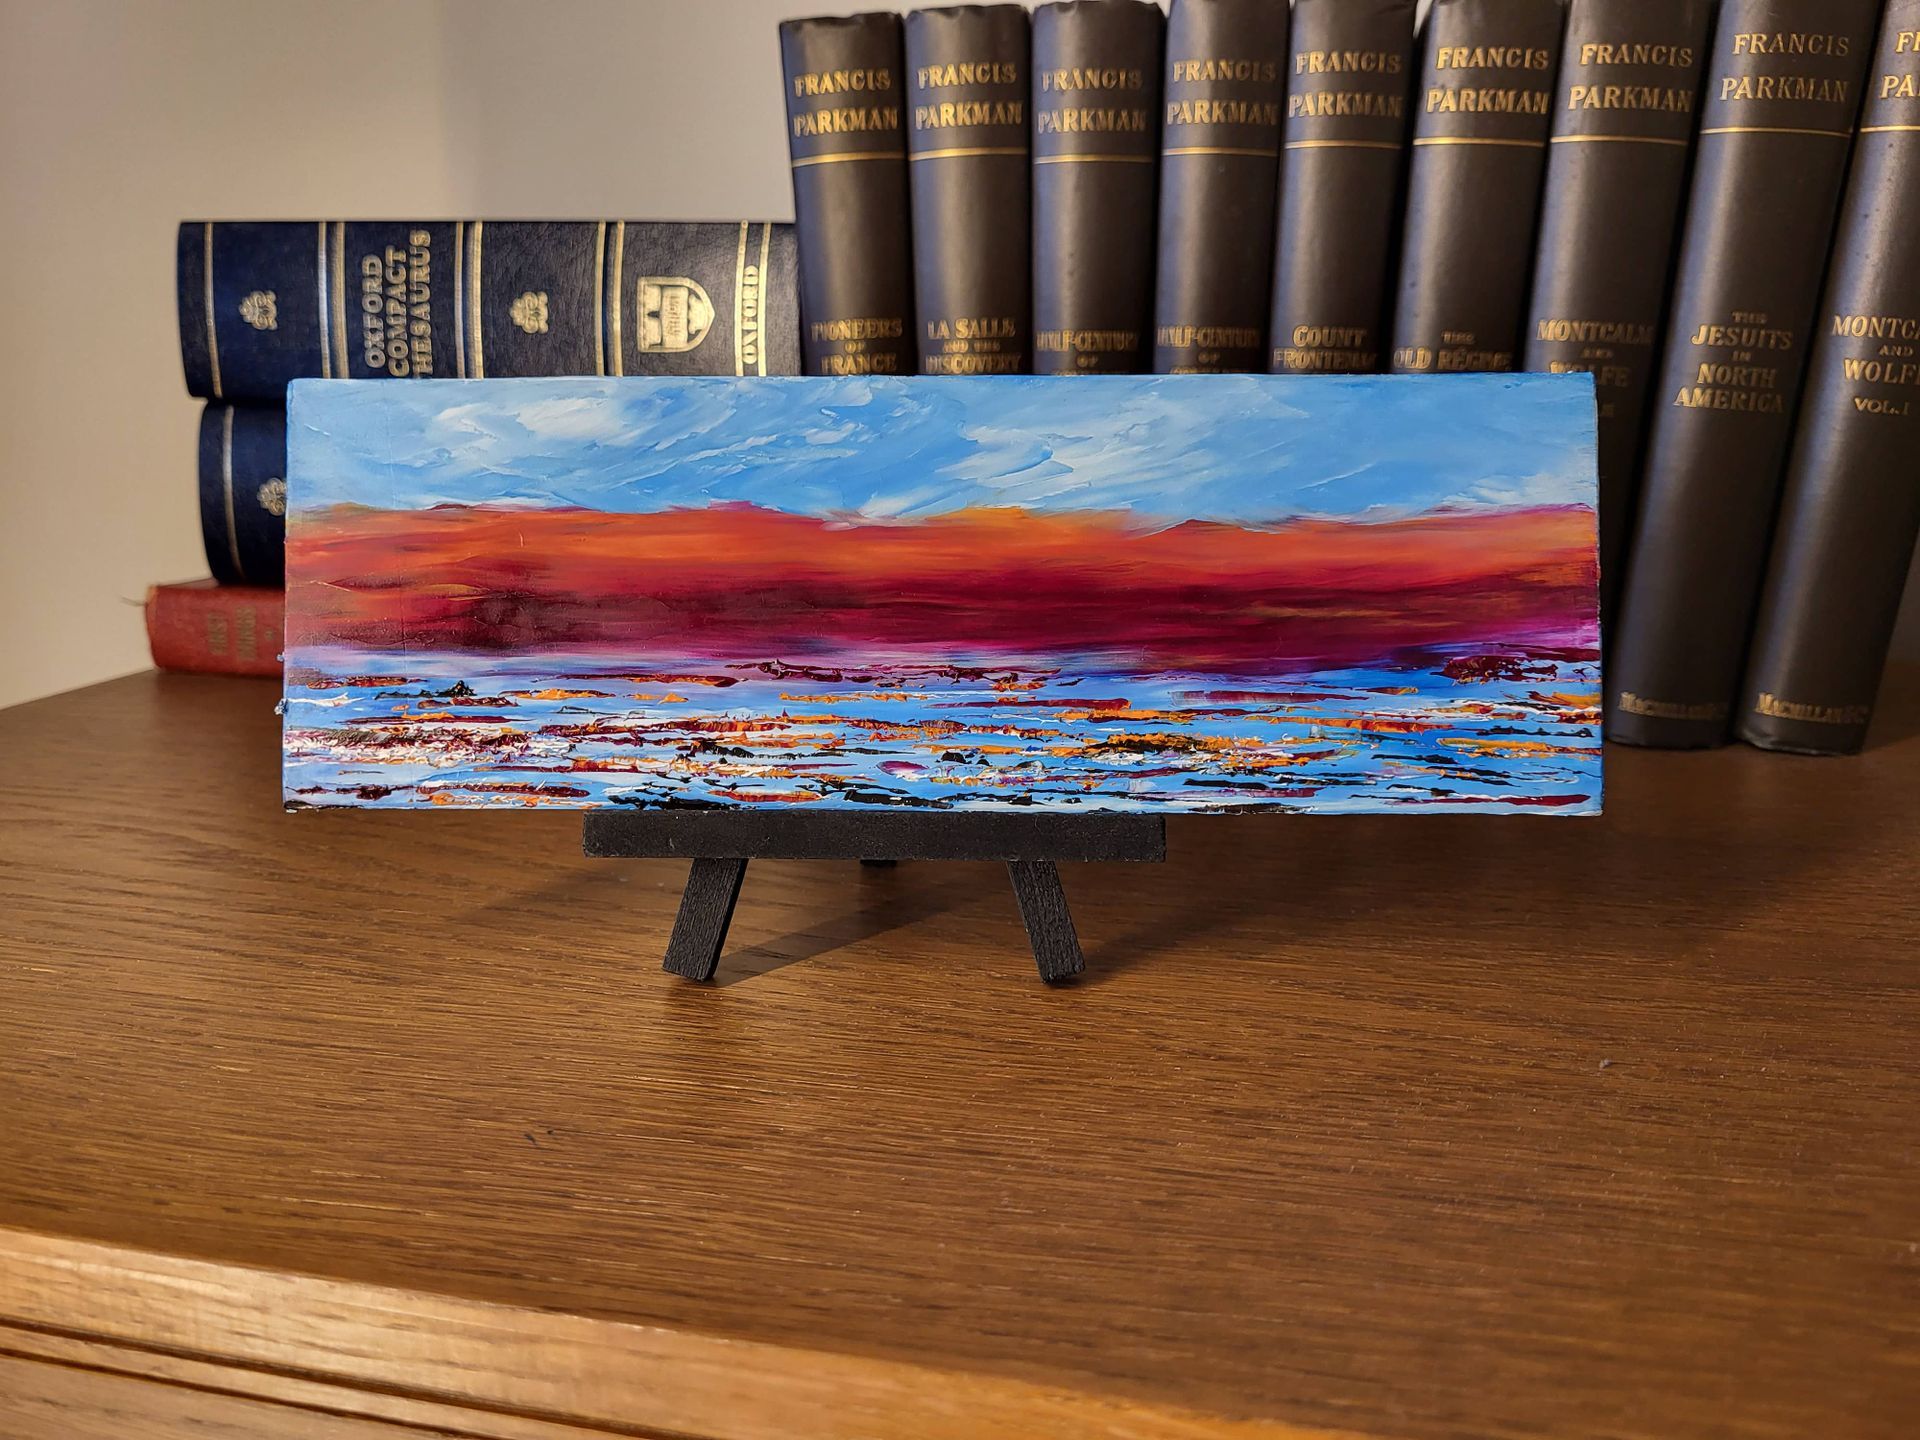 #O-72 Oil on Masonite 9 in. x 3 in. with or without  small easel. Dusk is approaching and the band of deep red and orange is in contrast to the clear blue sky. The whole scene is unfolding over a calm ocean with wavelets reflecting the reds and oranges.